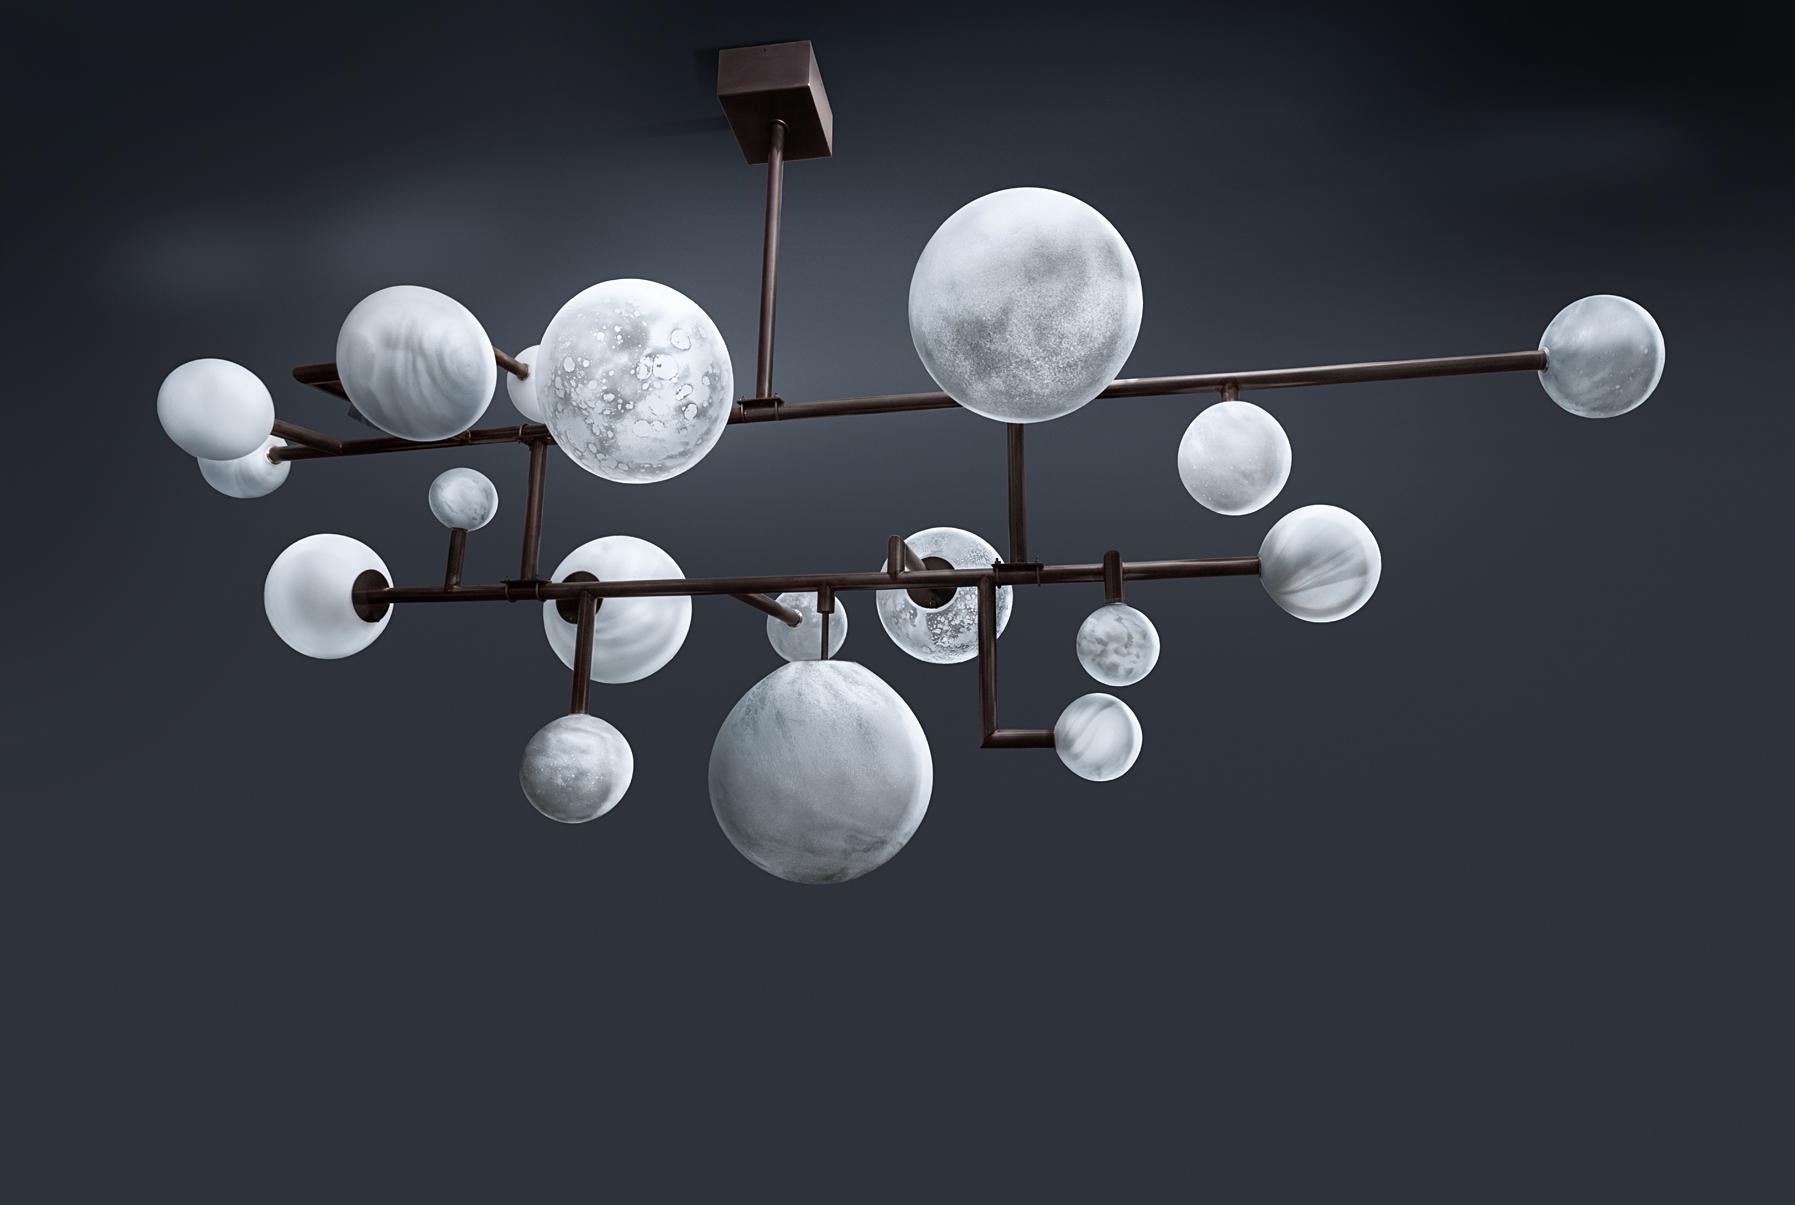 Balanced planets chandelier by Ludovic Clément d'Armont.
Materials: brass, blown glass, LEDs.
Dimensions: W 232 x D 82 x H 112 cm.

The chandelier balances itself, hanging at one hook only. Large glassware can even be held by their